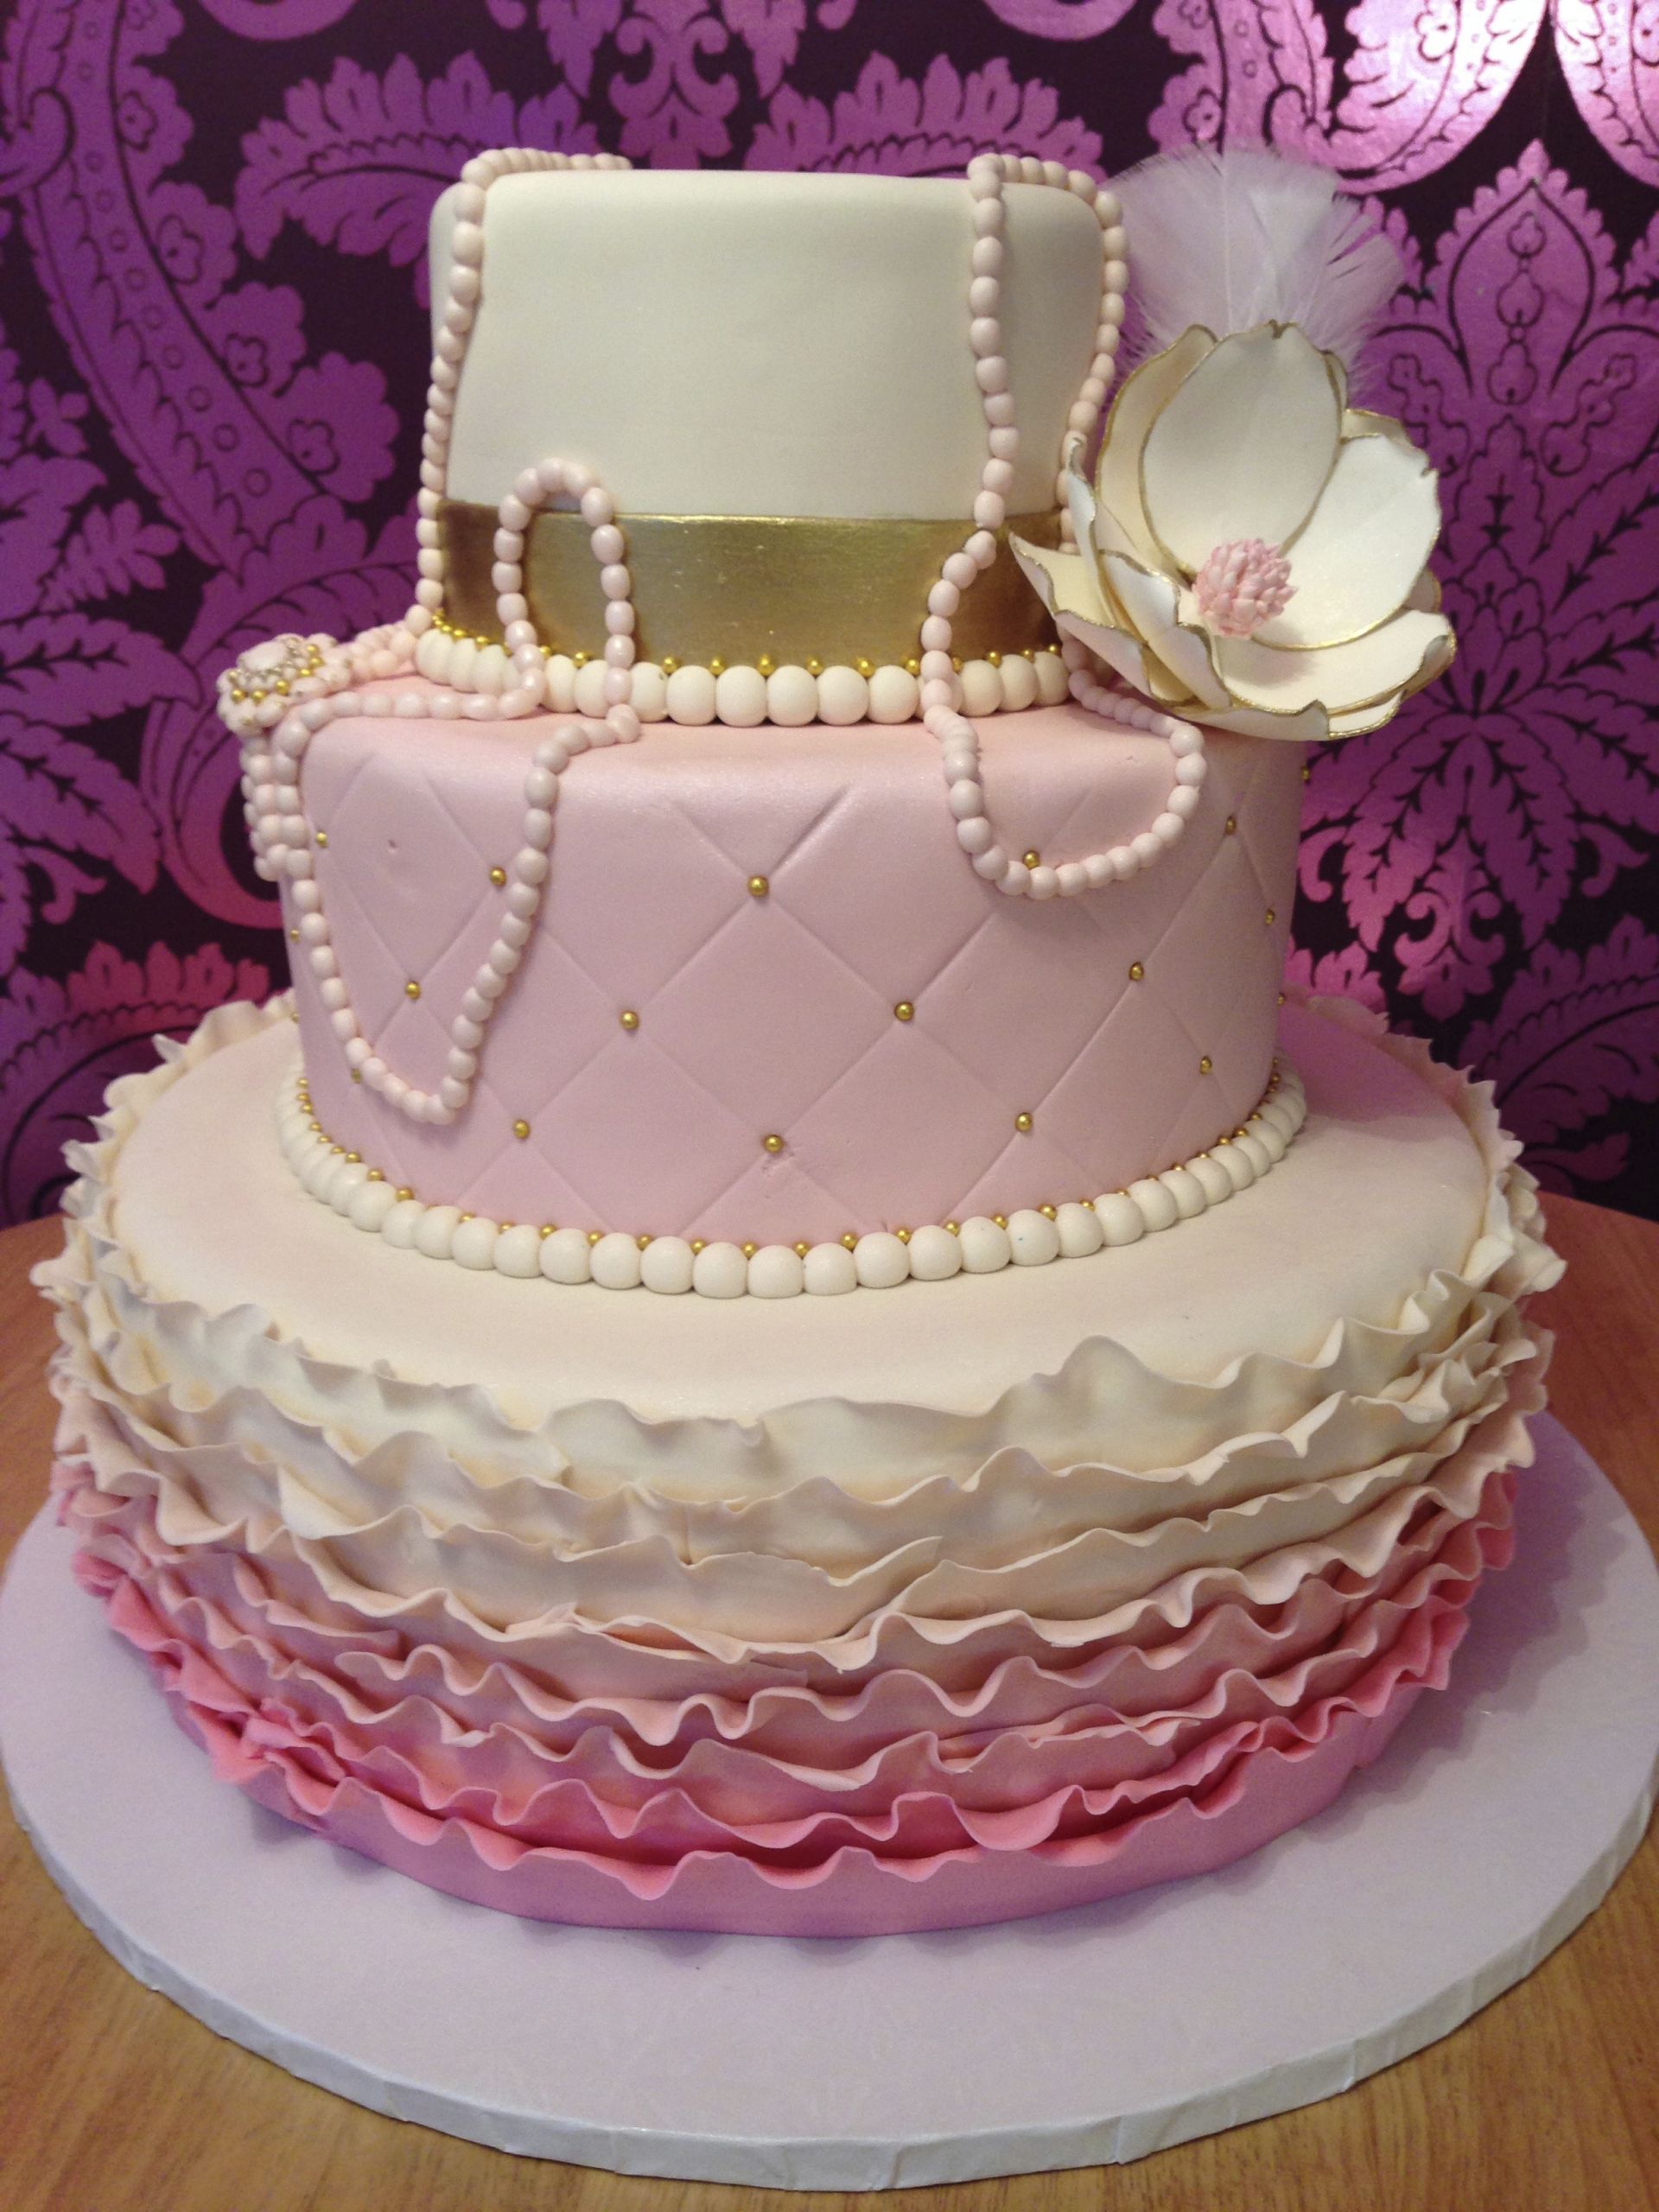 A Picture Of A Birthday Cake
 Birthday Cakes – The Cake Boutique